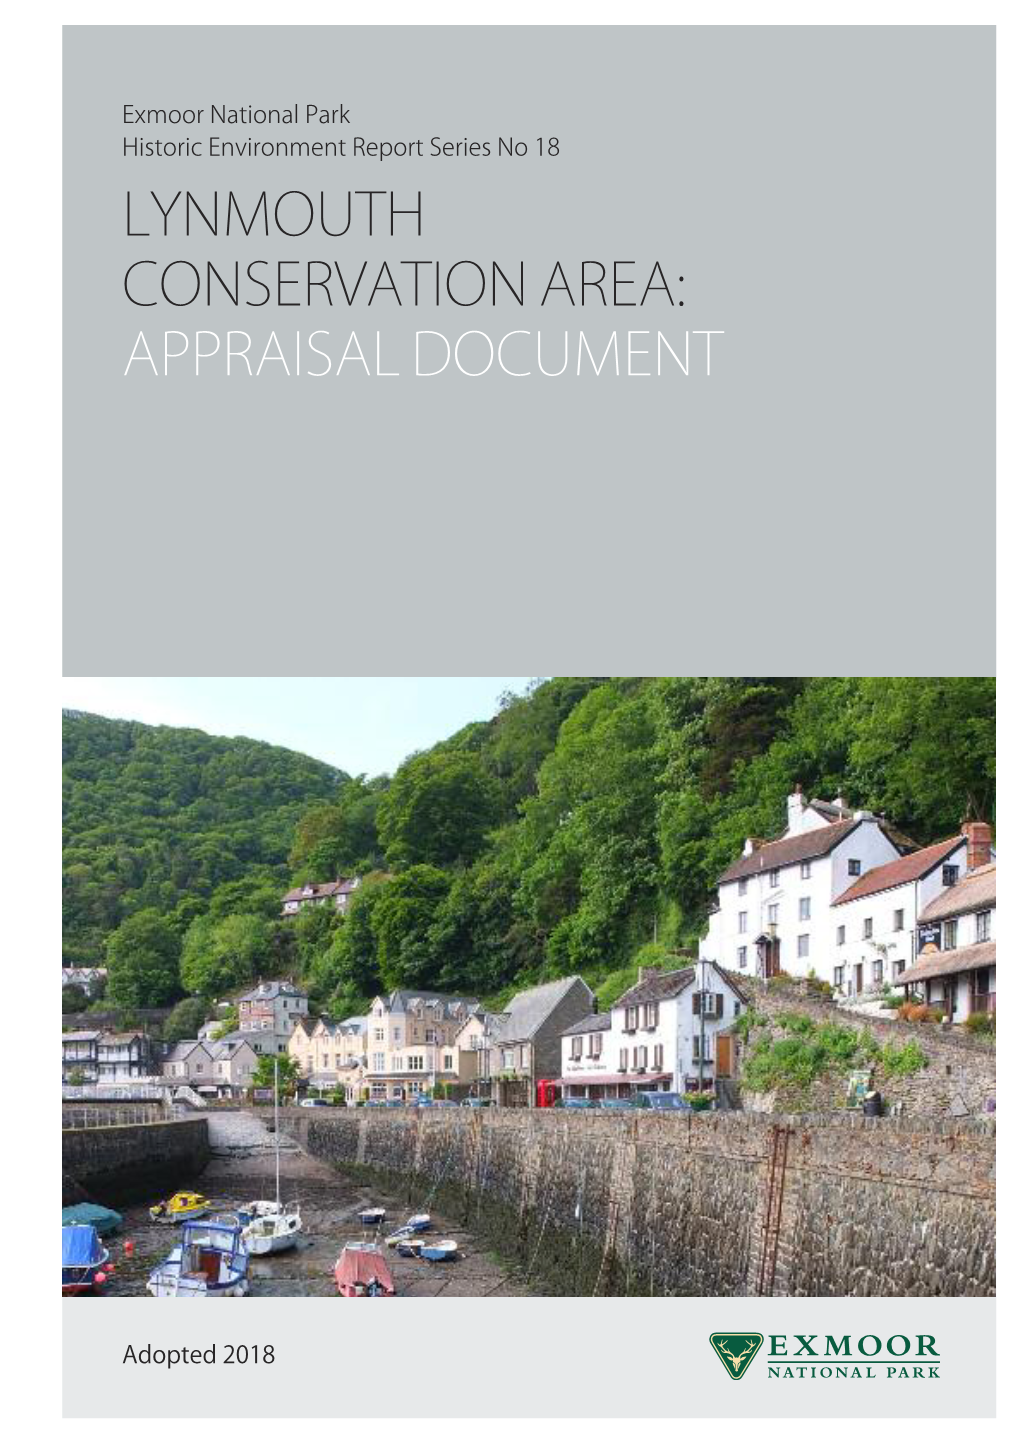 Lynmouth Conservation Area: Appraisal Document